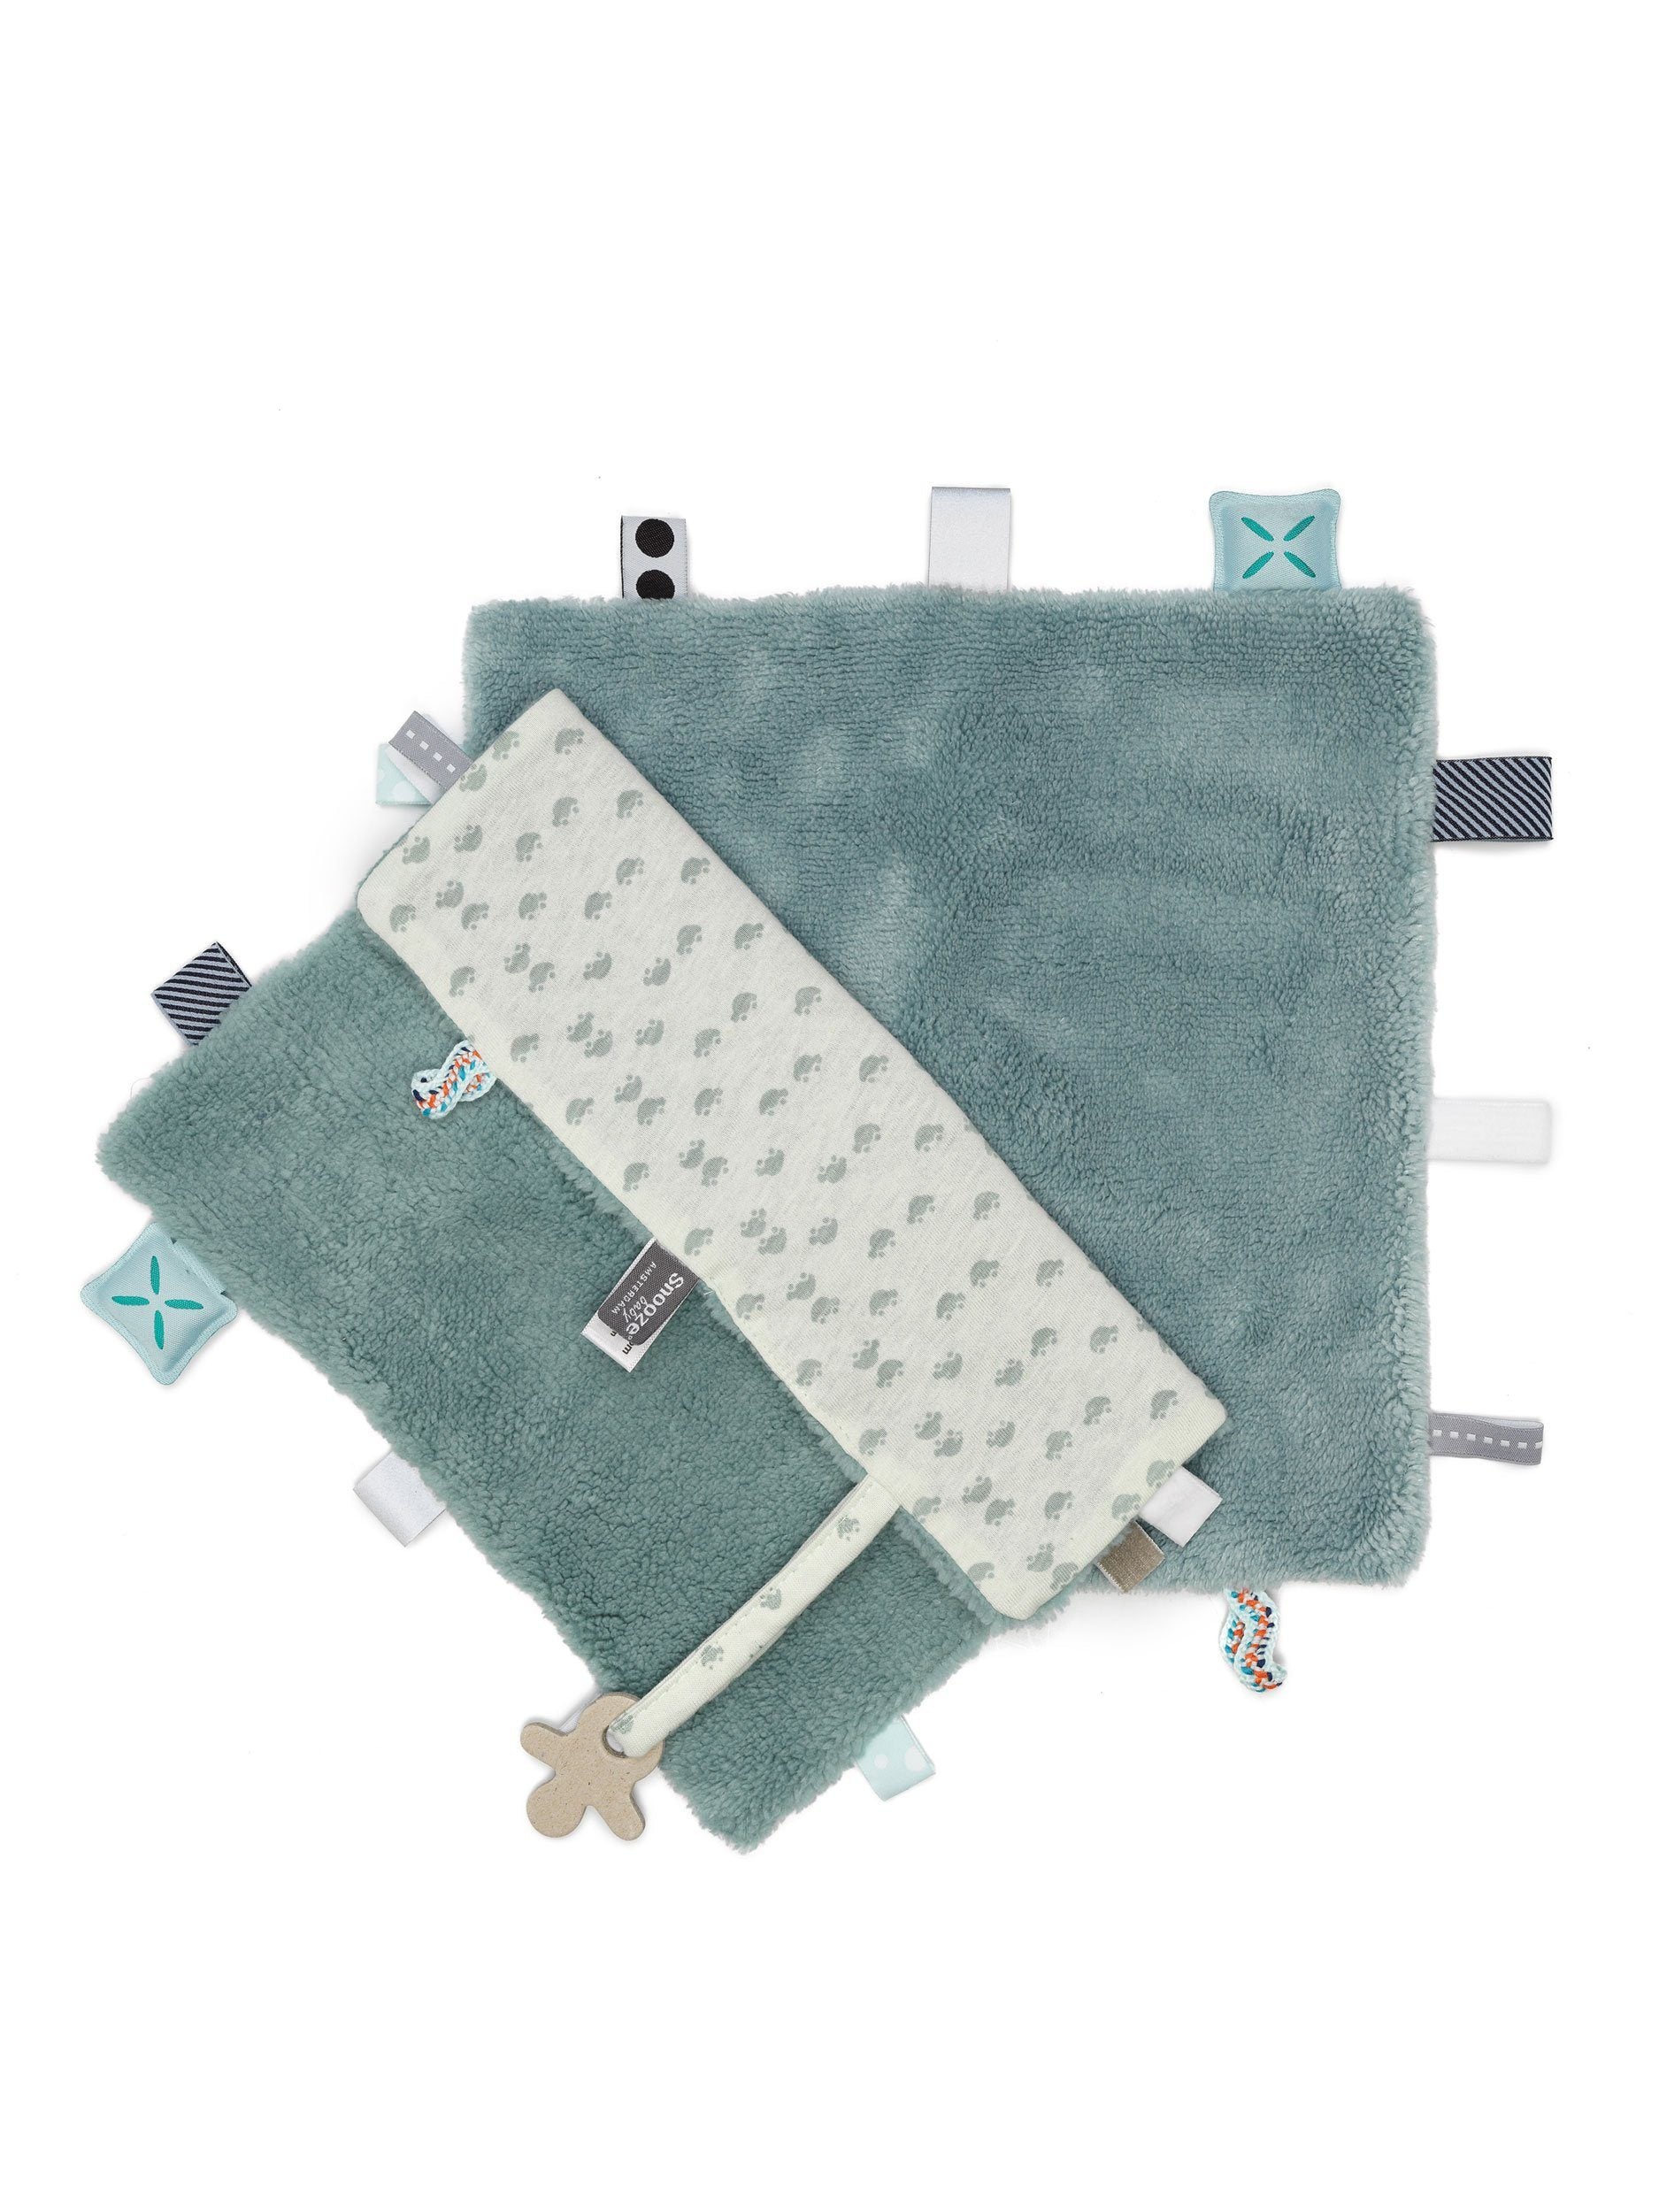 Sweet Dreaming Fluffy Comforter with tags - Teal with Car Print - Comforter - Snoozebaby